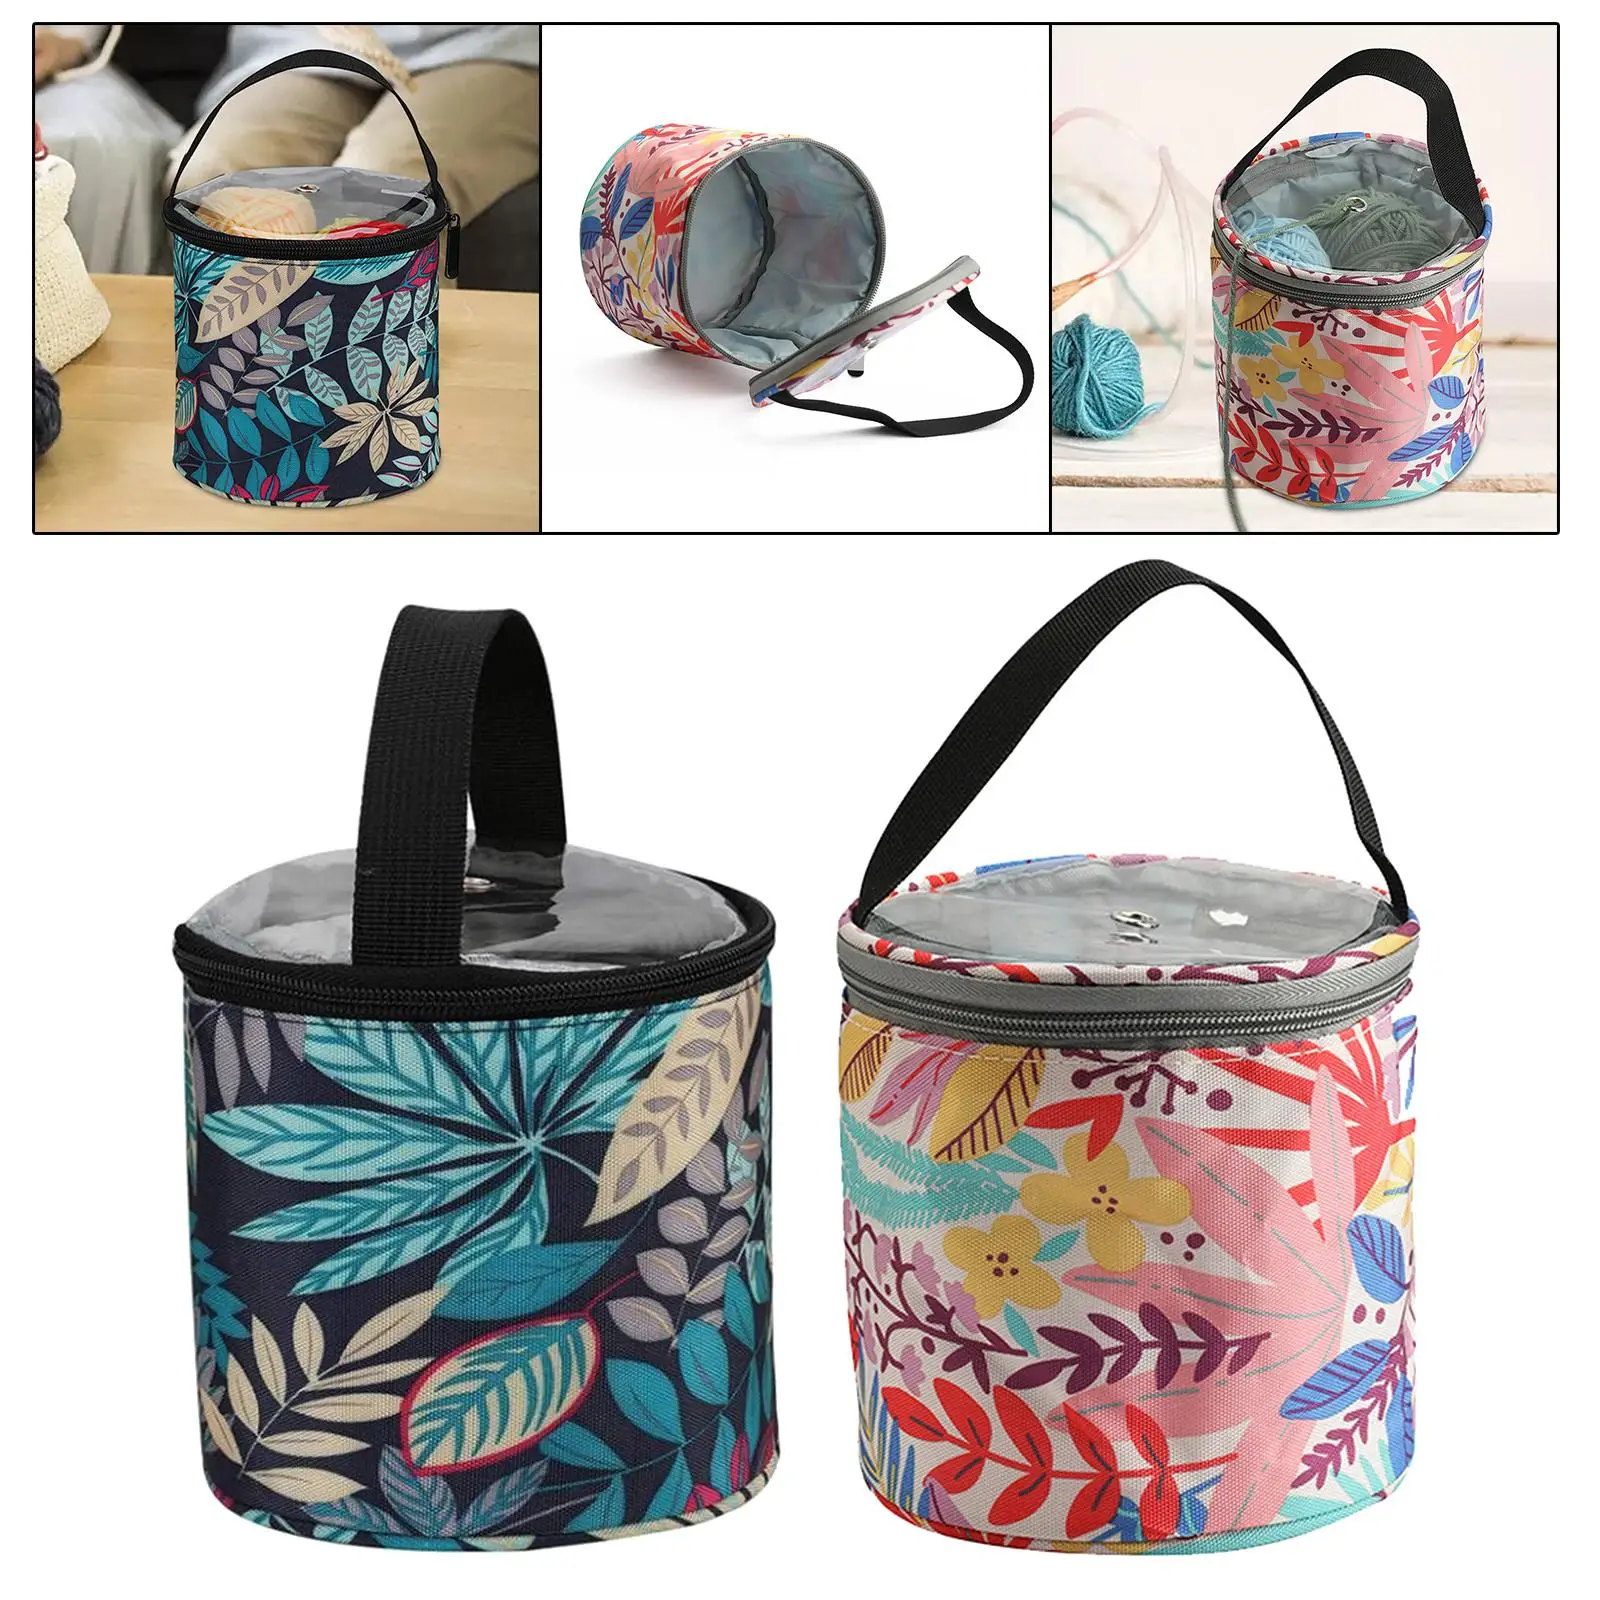 Yarn Bag for Crocheting Yarn Storage Bag Container Portable Large Capacity Sturdy Knitting Bag Tote for Embroidery Supplies